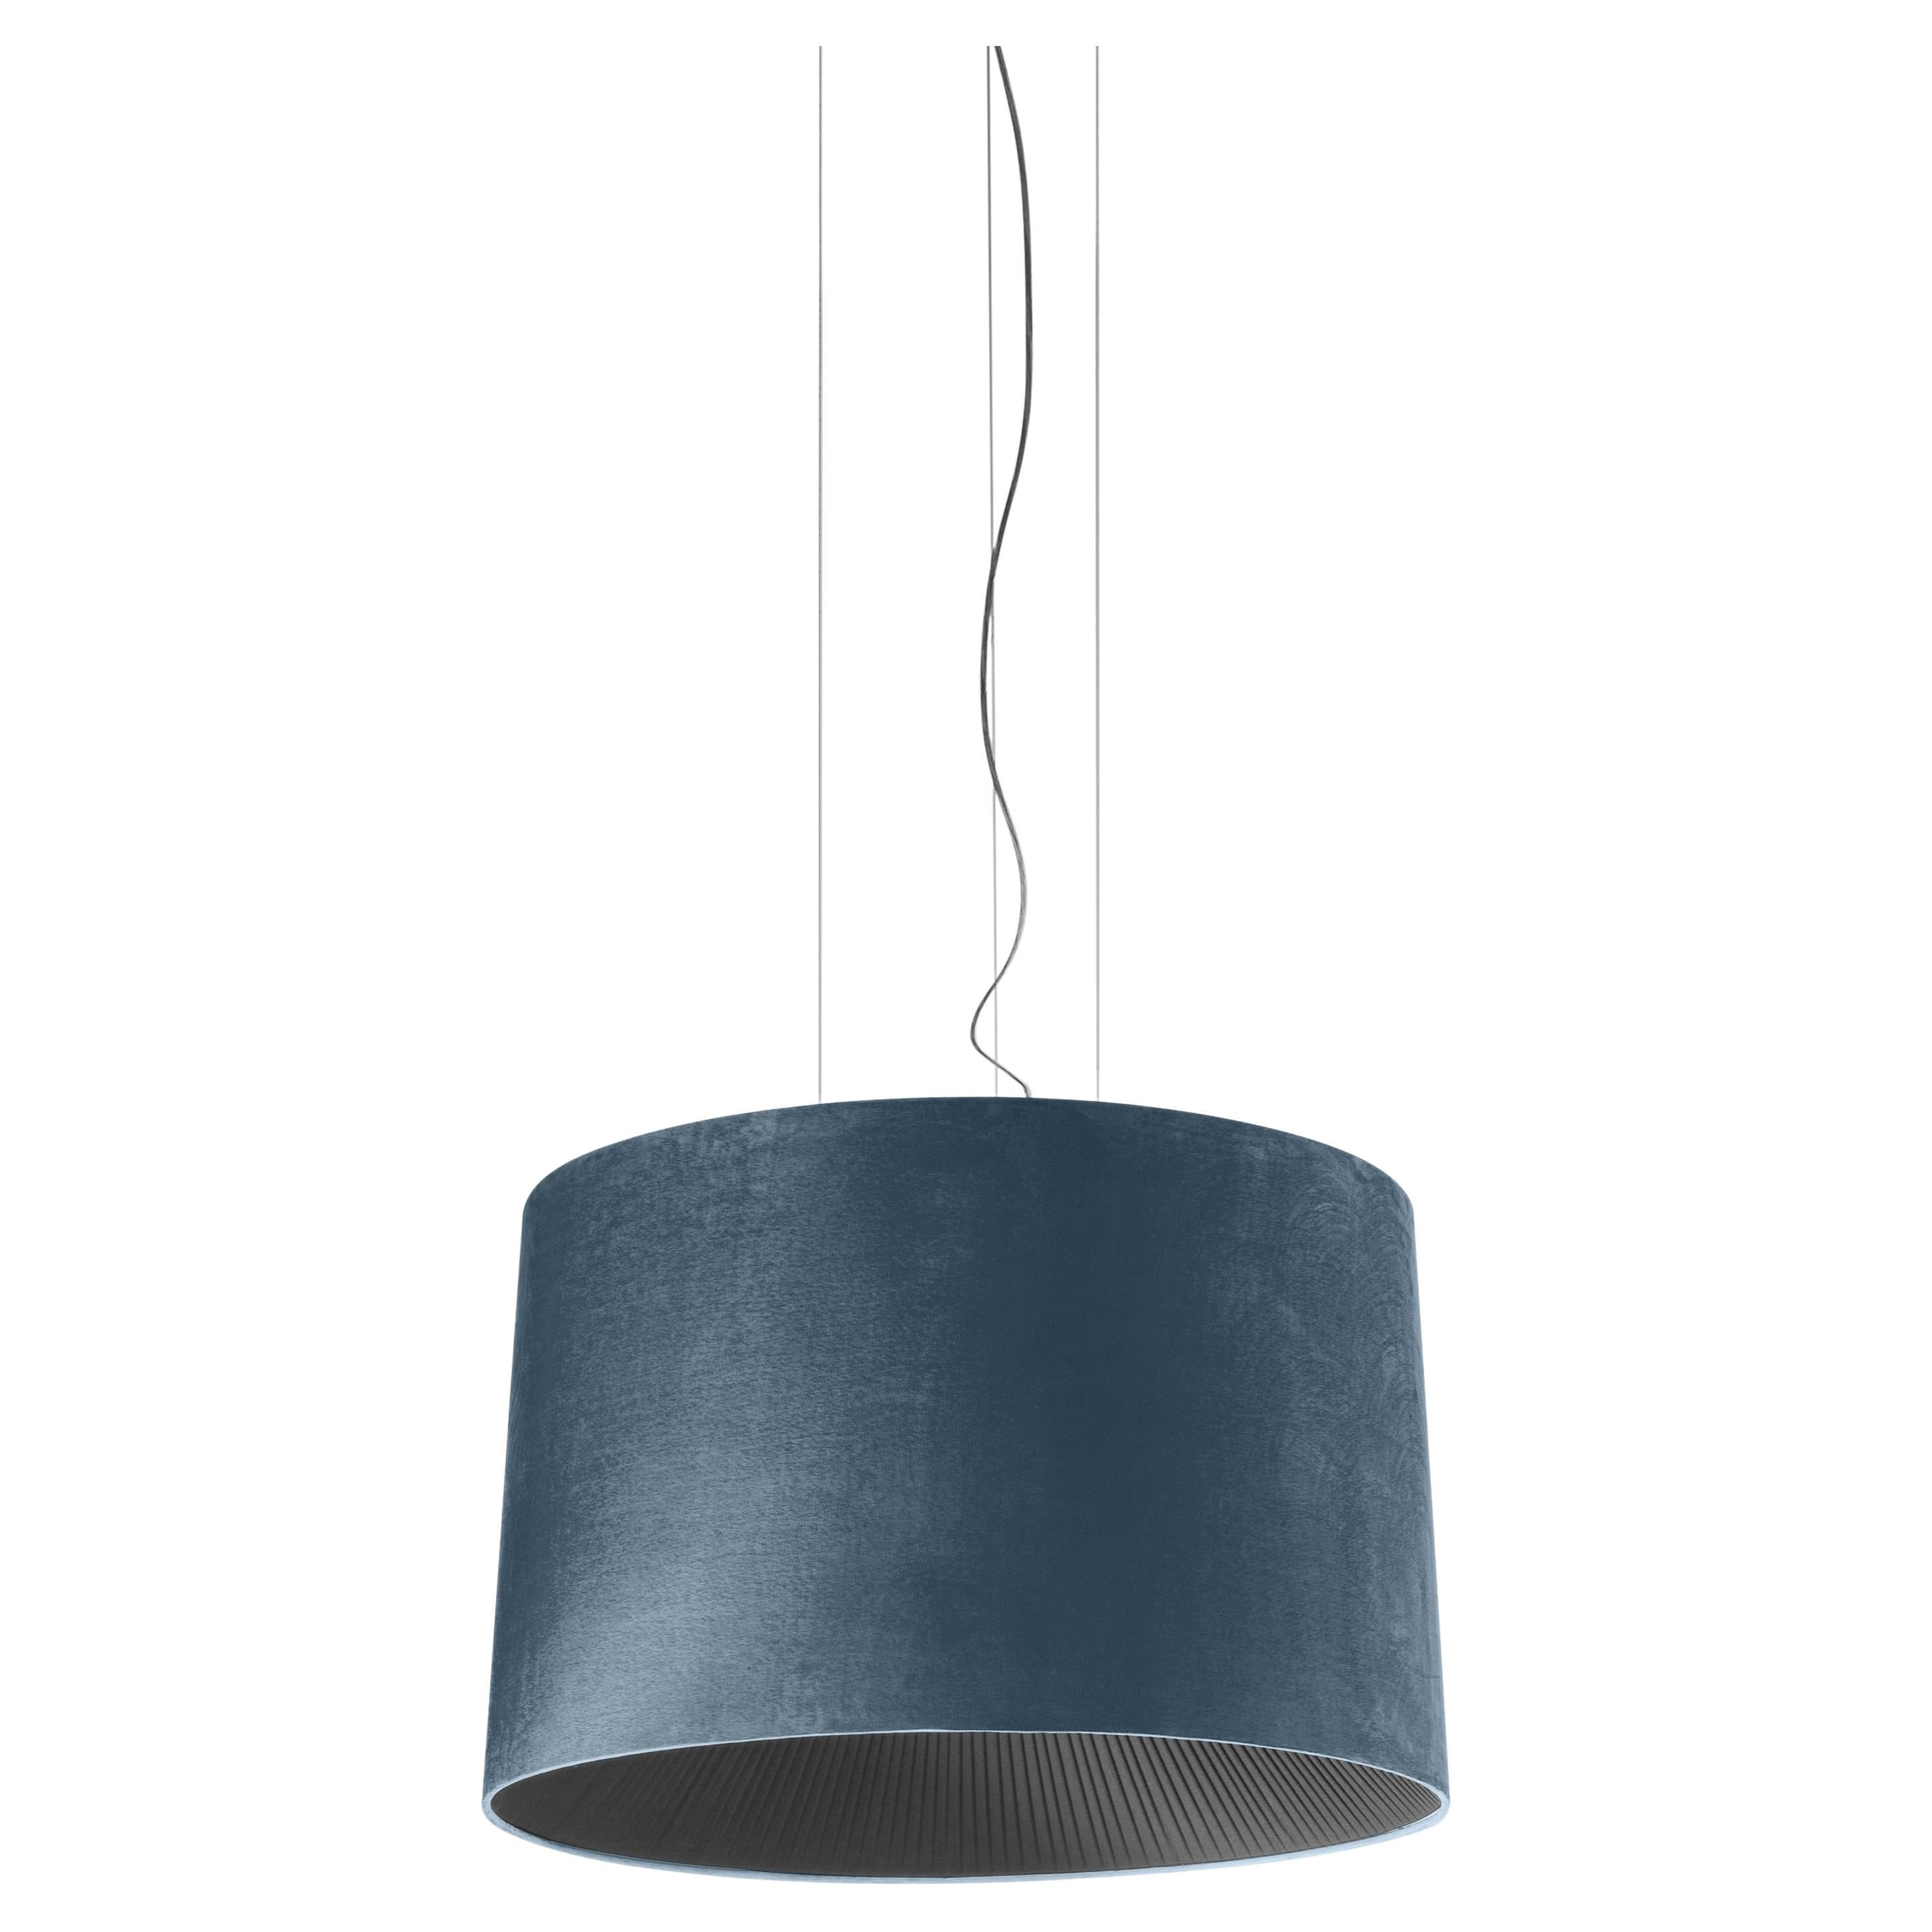 Axolight Large Velvet Pendant Lamp in Brown by Manuel & Vanessa Vivian

The essential geometry, combined with the velvet-like texture, give life to Velvet. A collection full of charm and timeless elegance. The simplicity of its timeless design, the